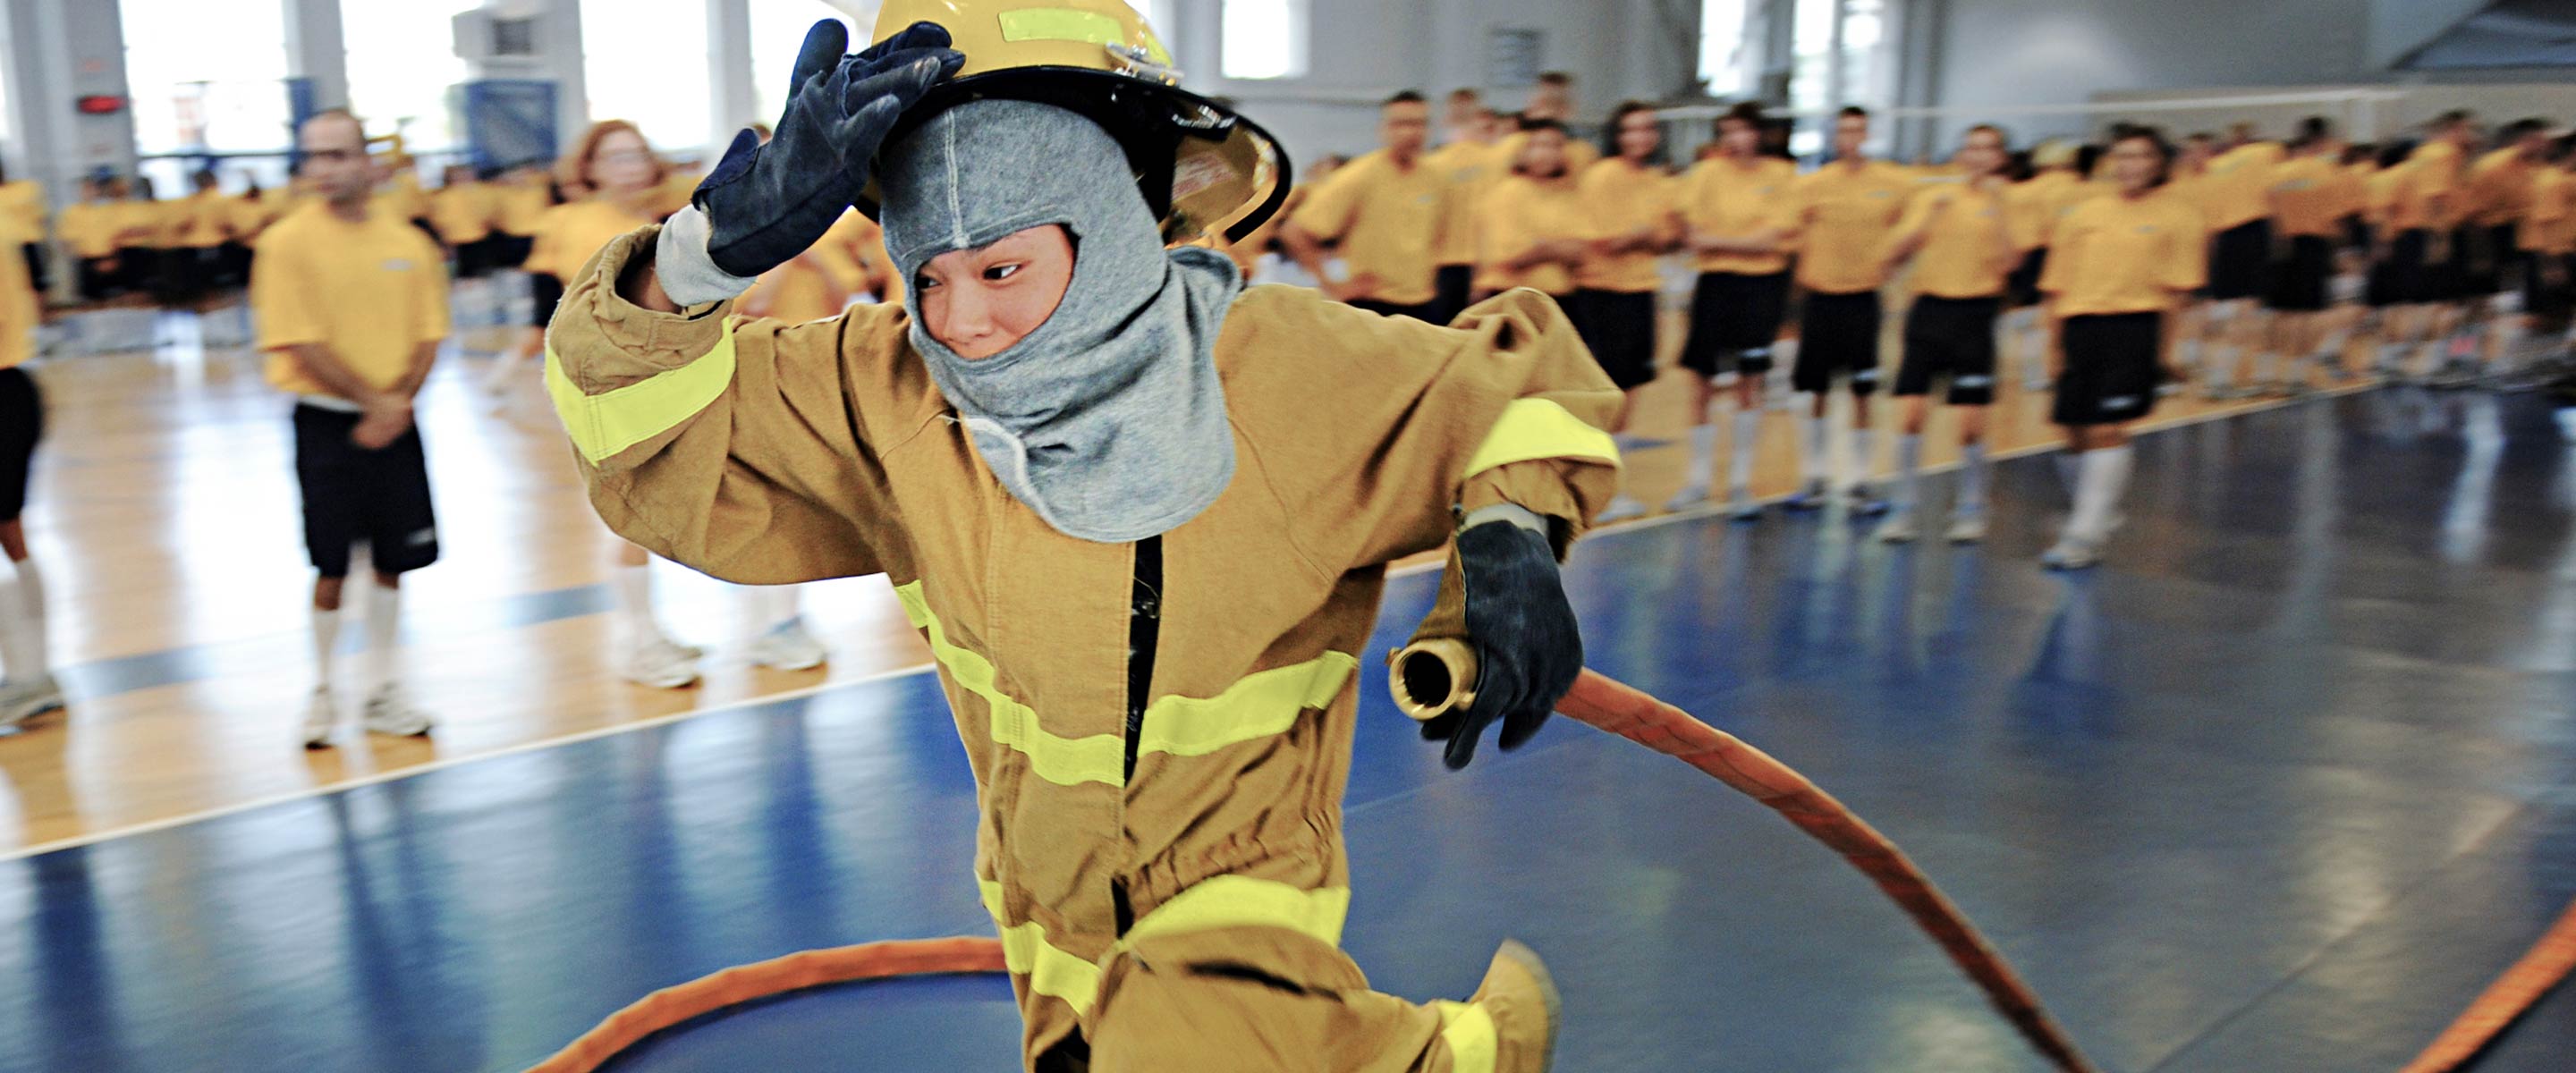 United States Navy recruits learn about fighting fires at boot camp